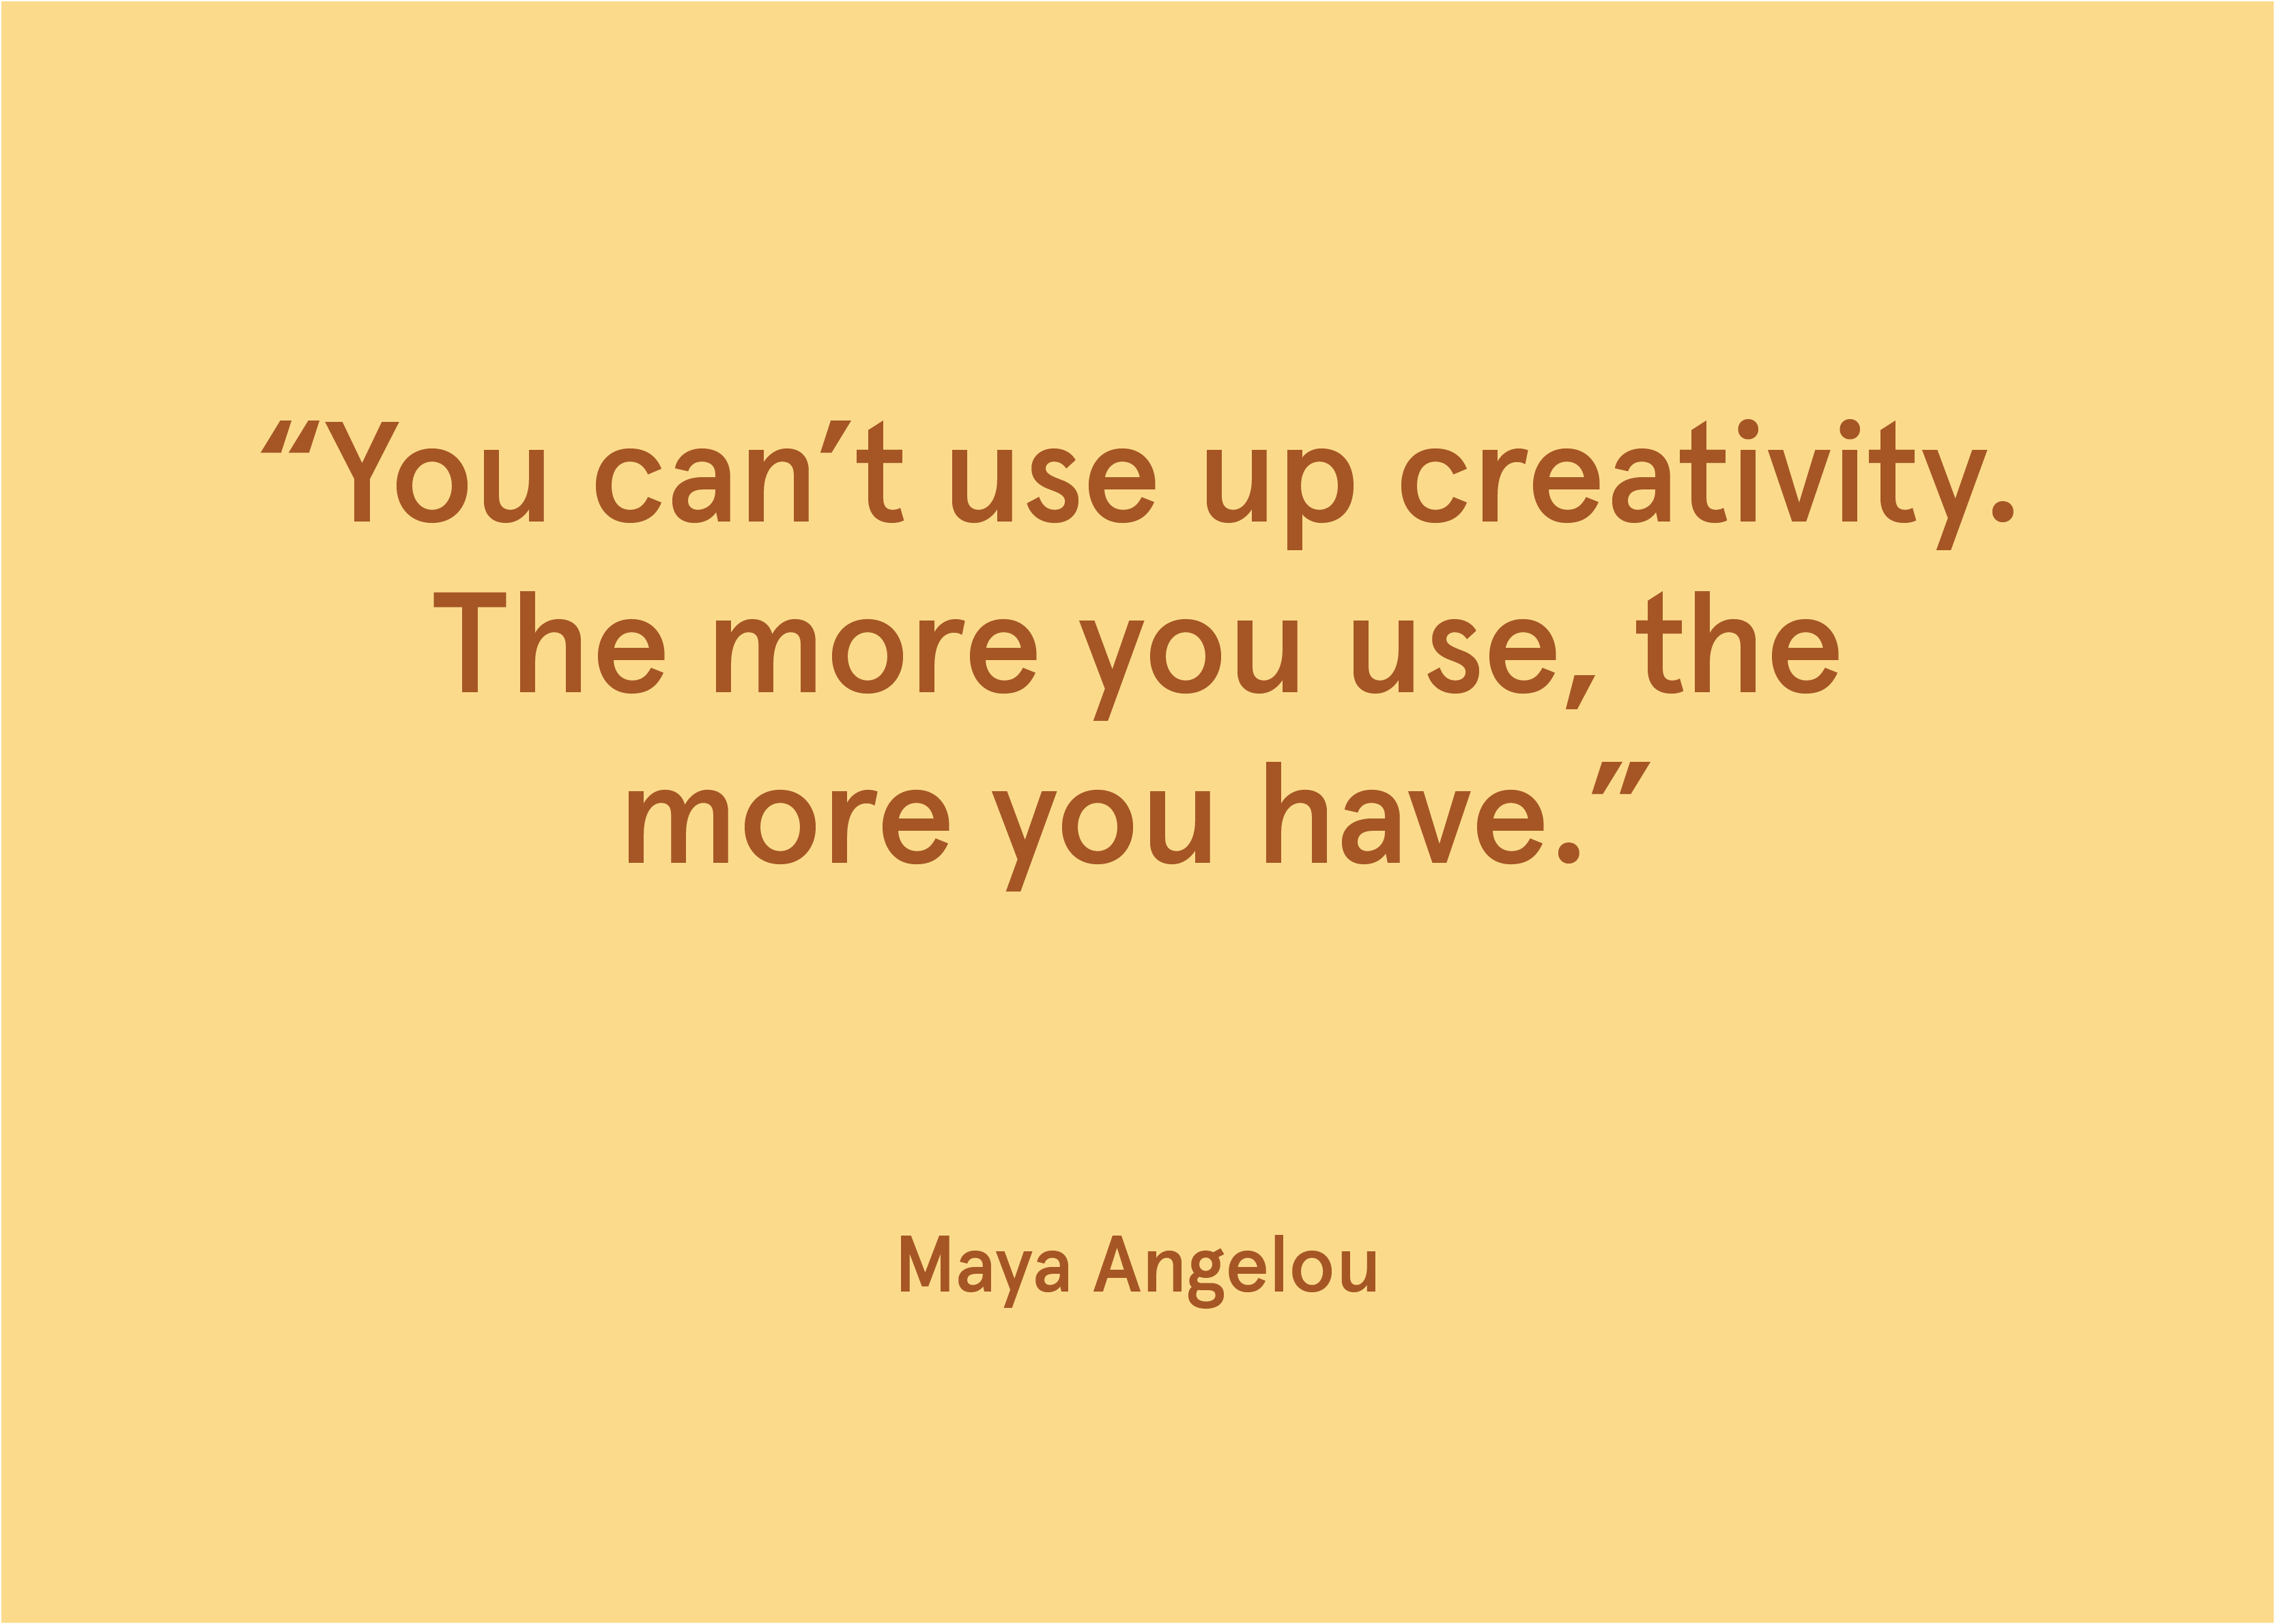 12 inspiring creativity quotes that'll get your ideas flowing